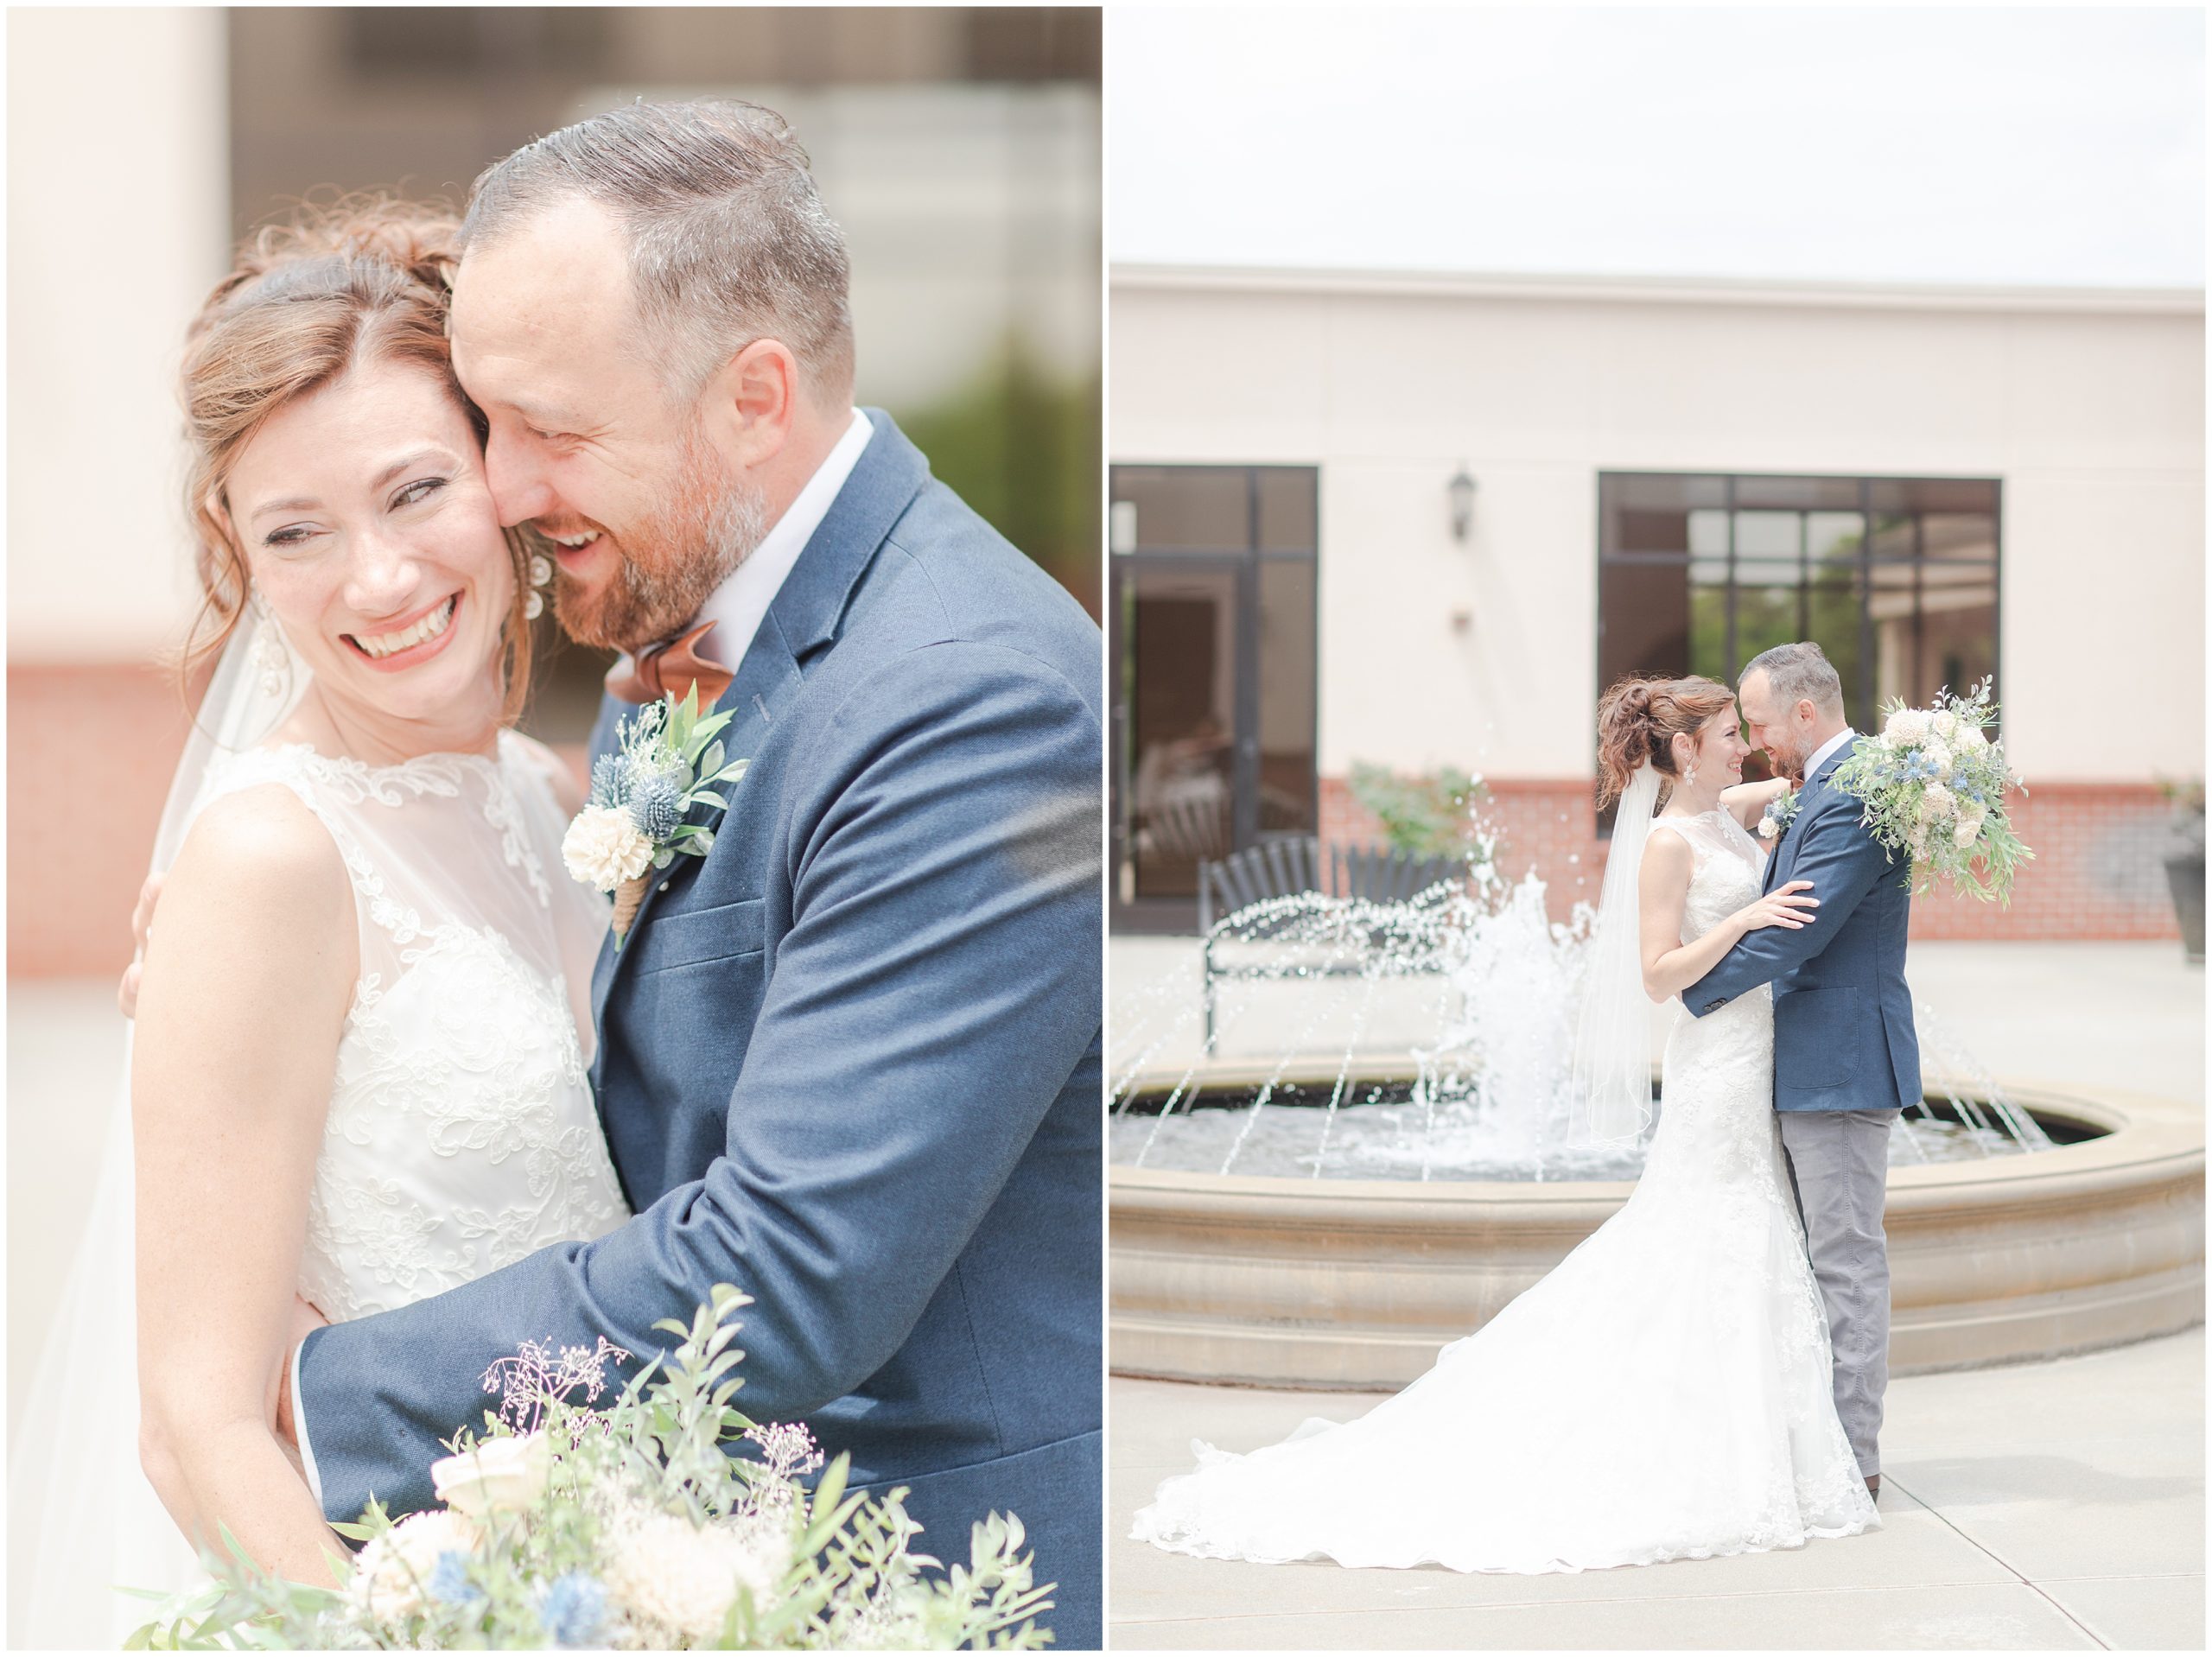 Lawrenceville wedding portraits for bride and groom